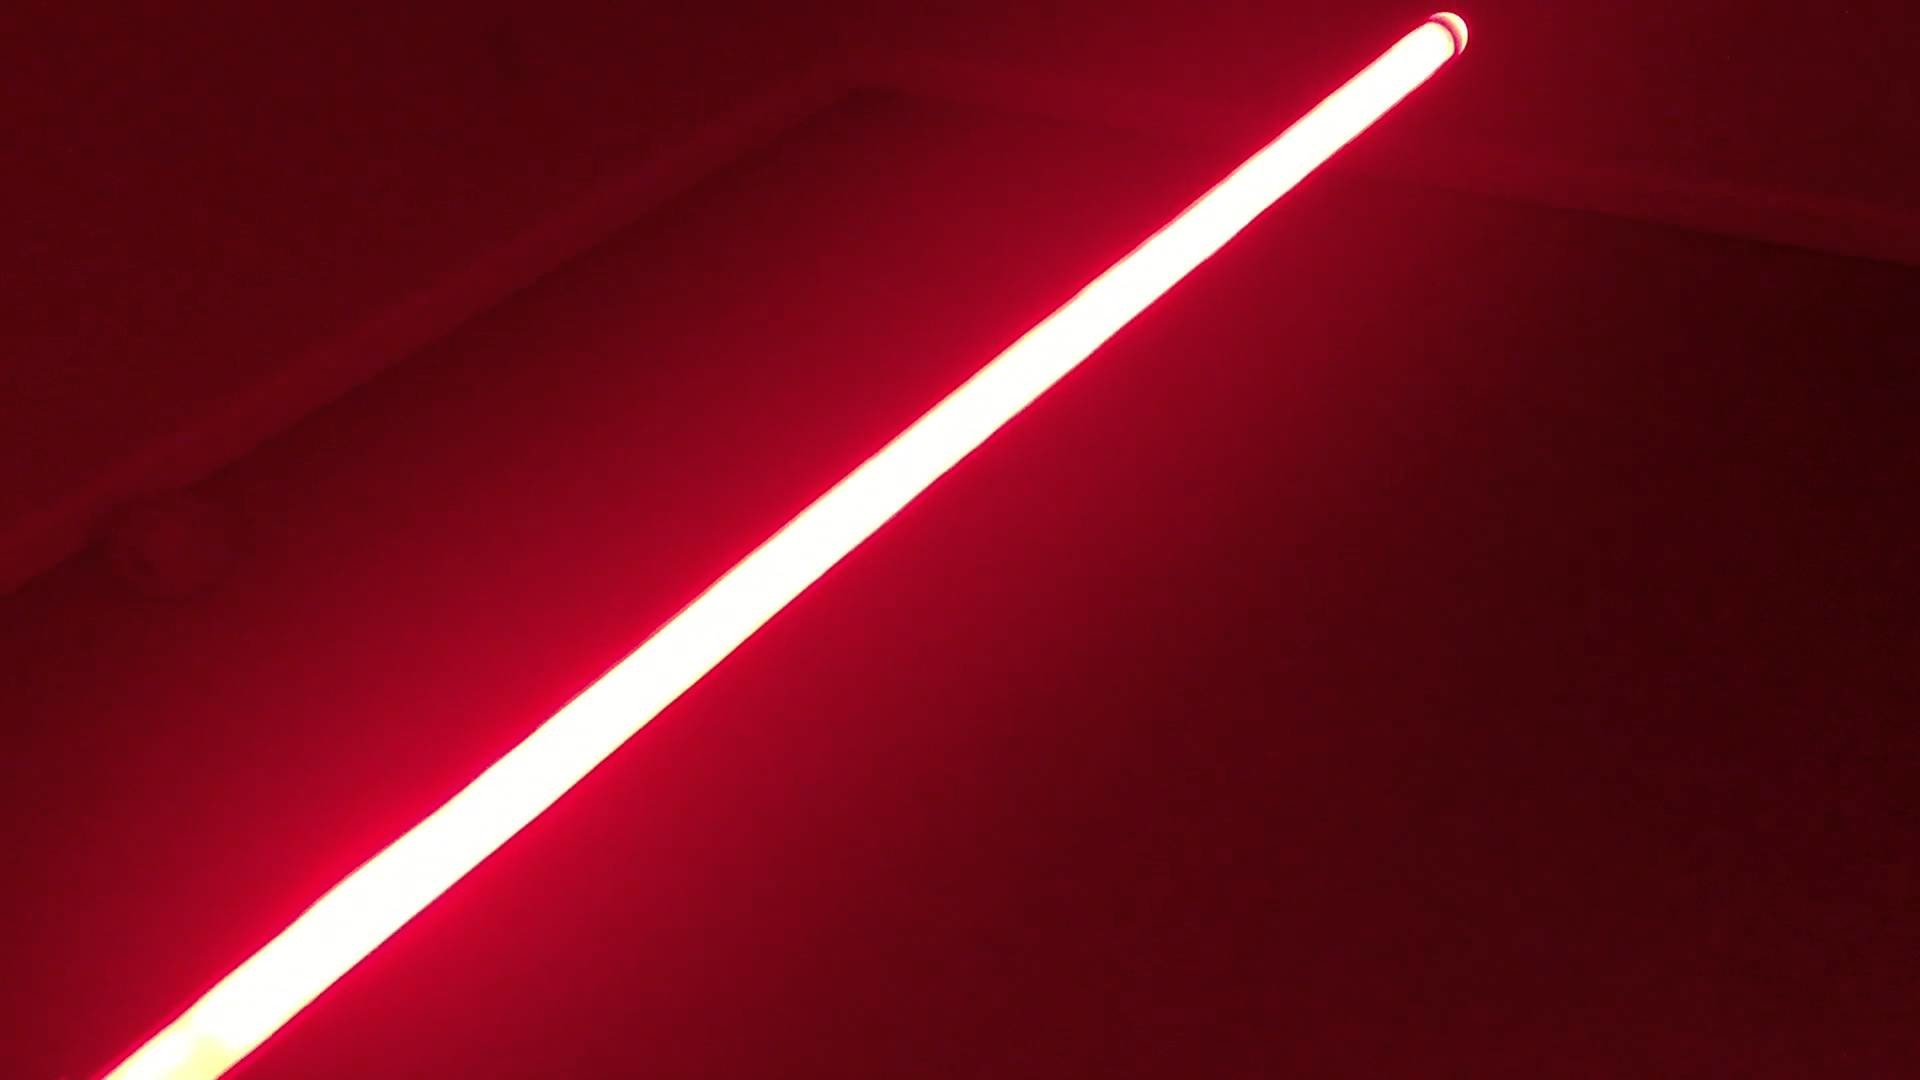 1920x1080 Red Lightsaber Blade with Yellow Flash on Clash Test #4 Lights Off - YouTube